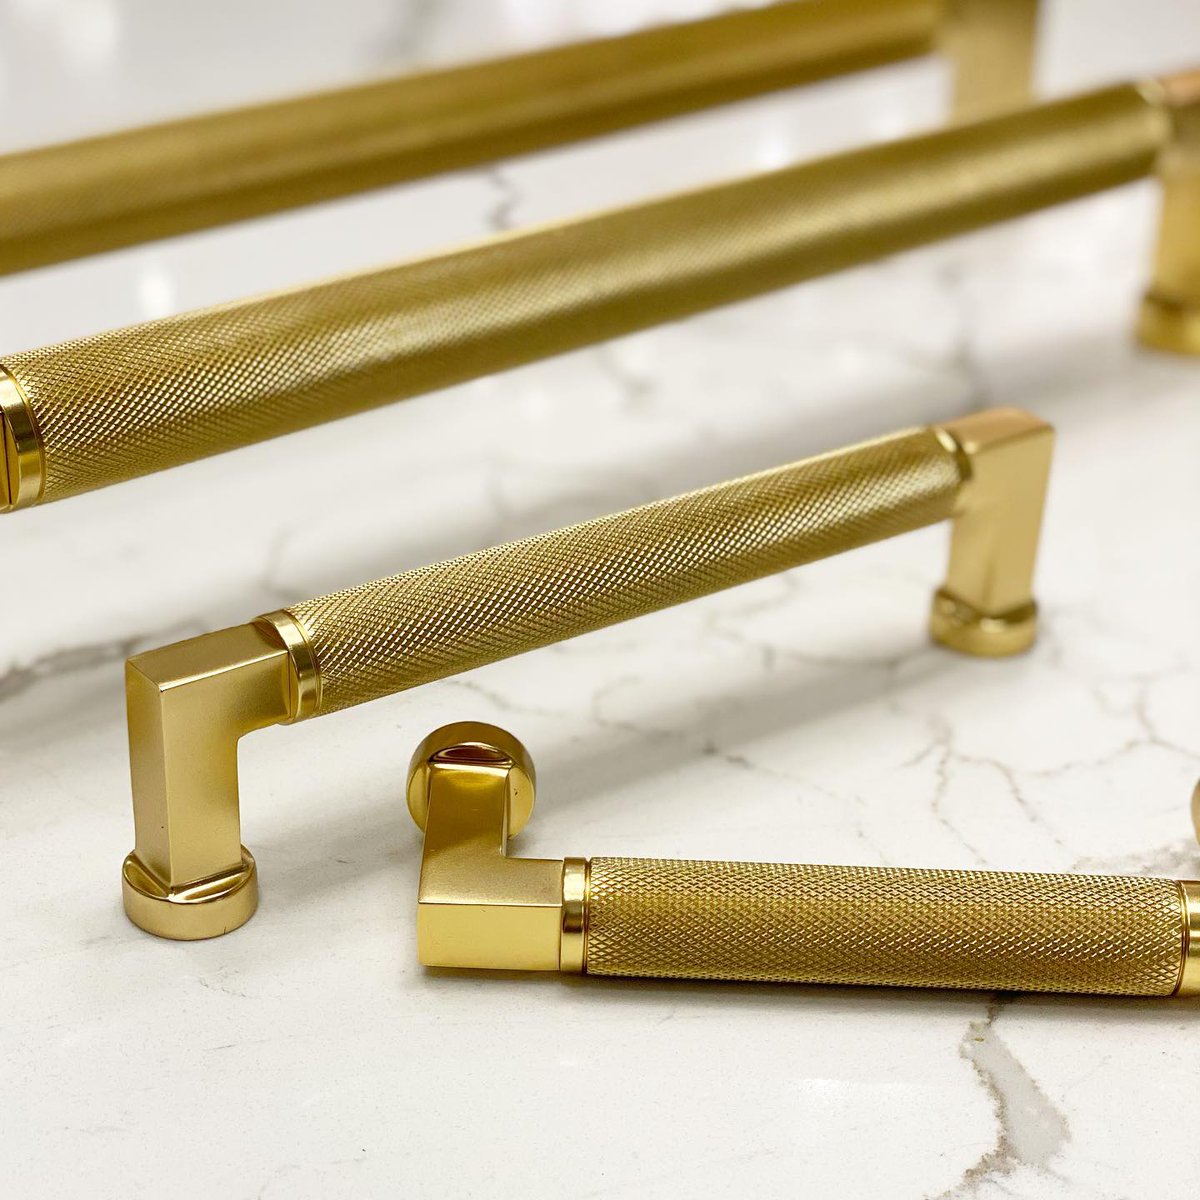 Diamond knurling details add a stunning finishing touch to these pulls from the Manor collection. ✨ #InteriorDesign #CustomHardware #LuxuryDecor

📸: Needham Decorative Hardware